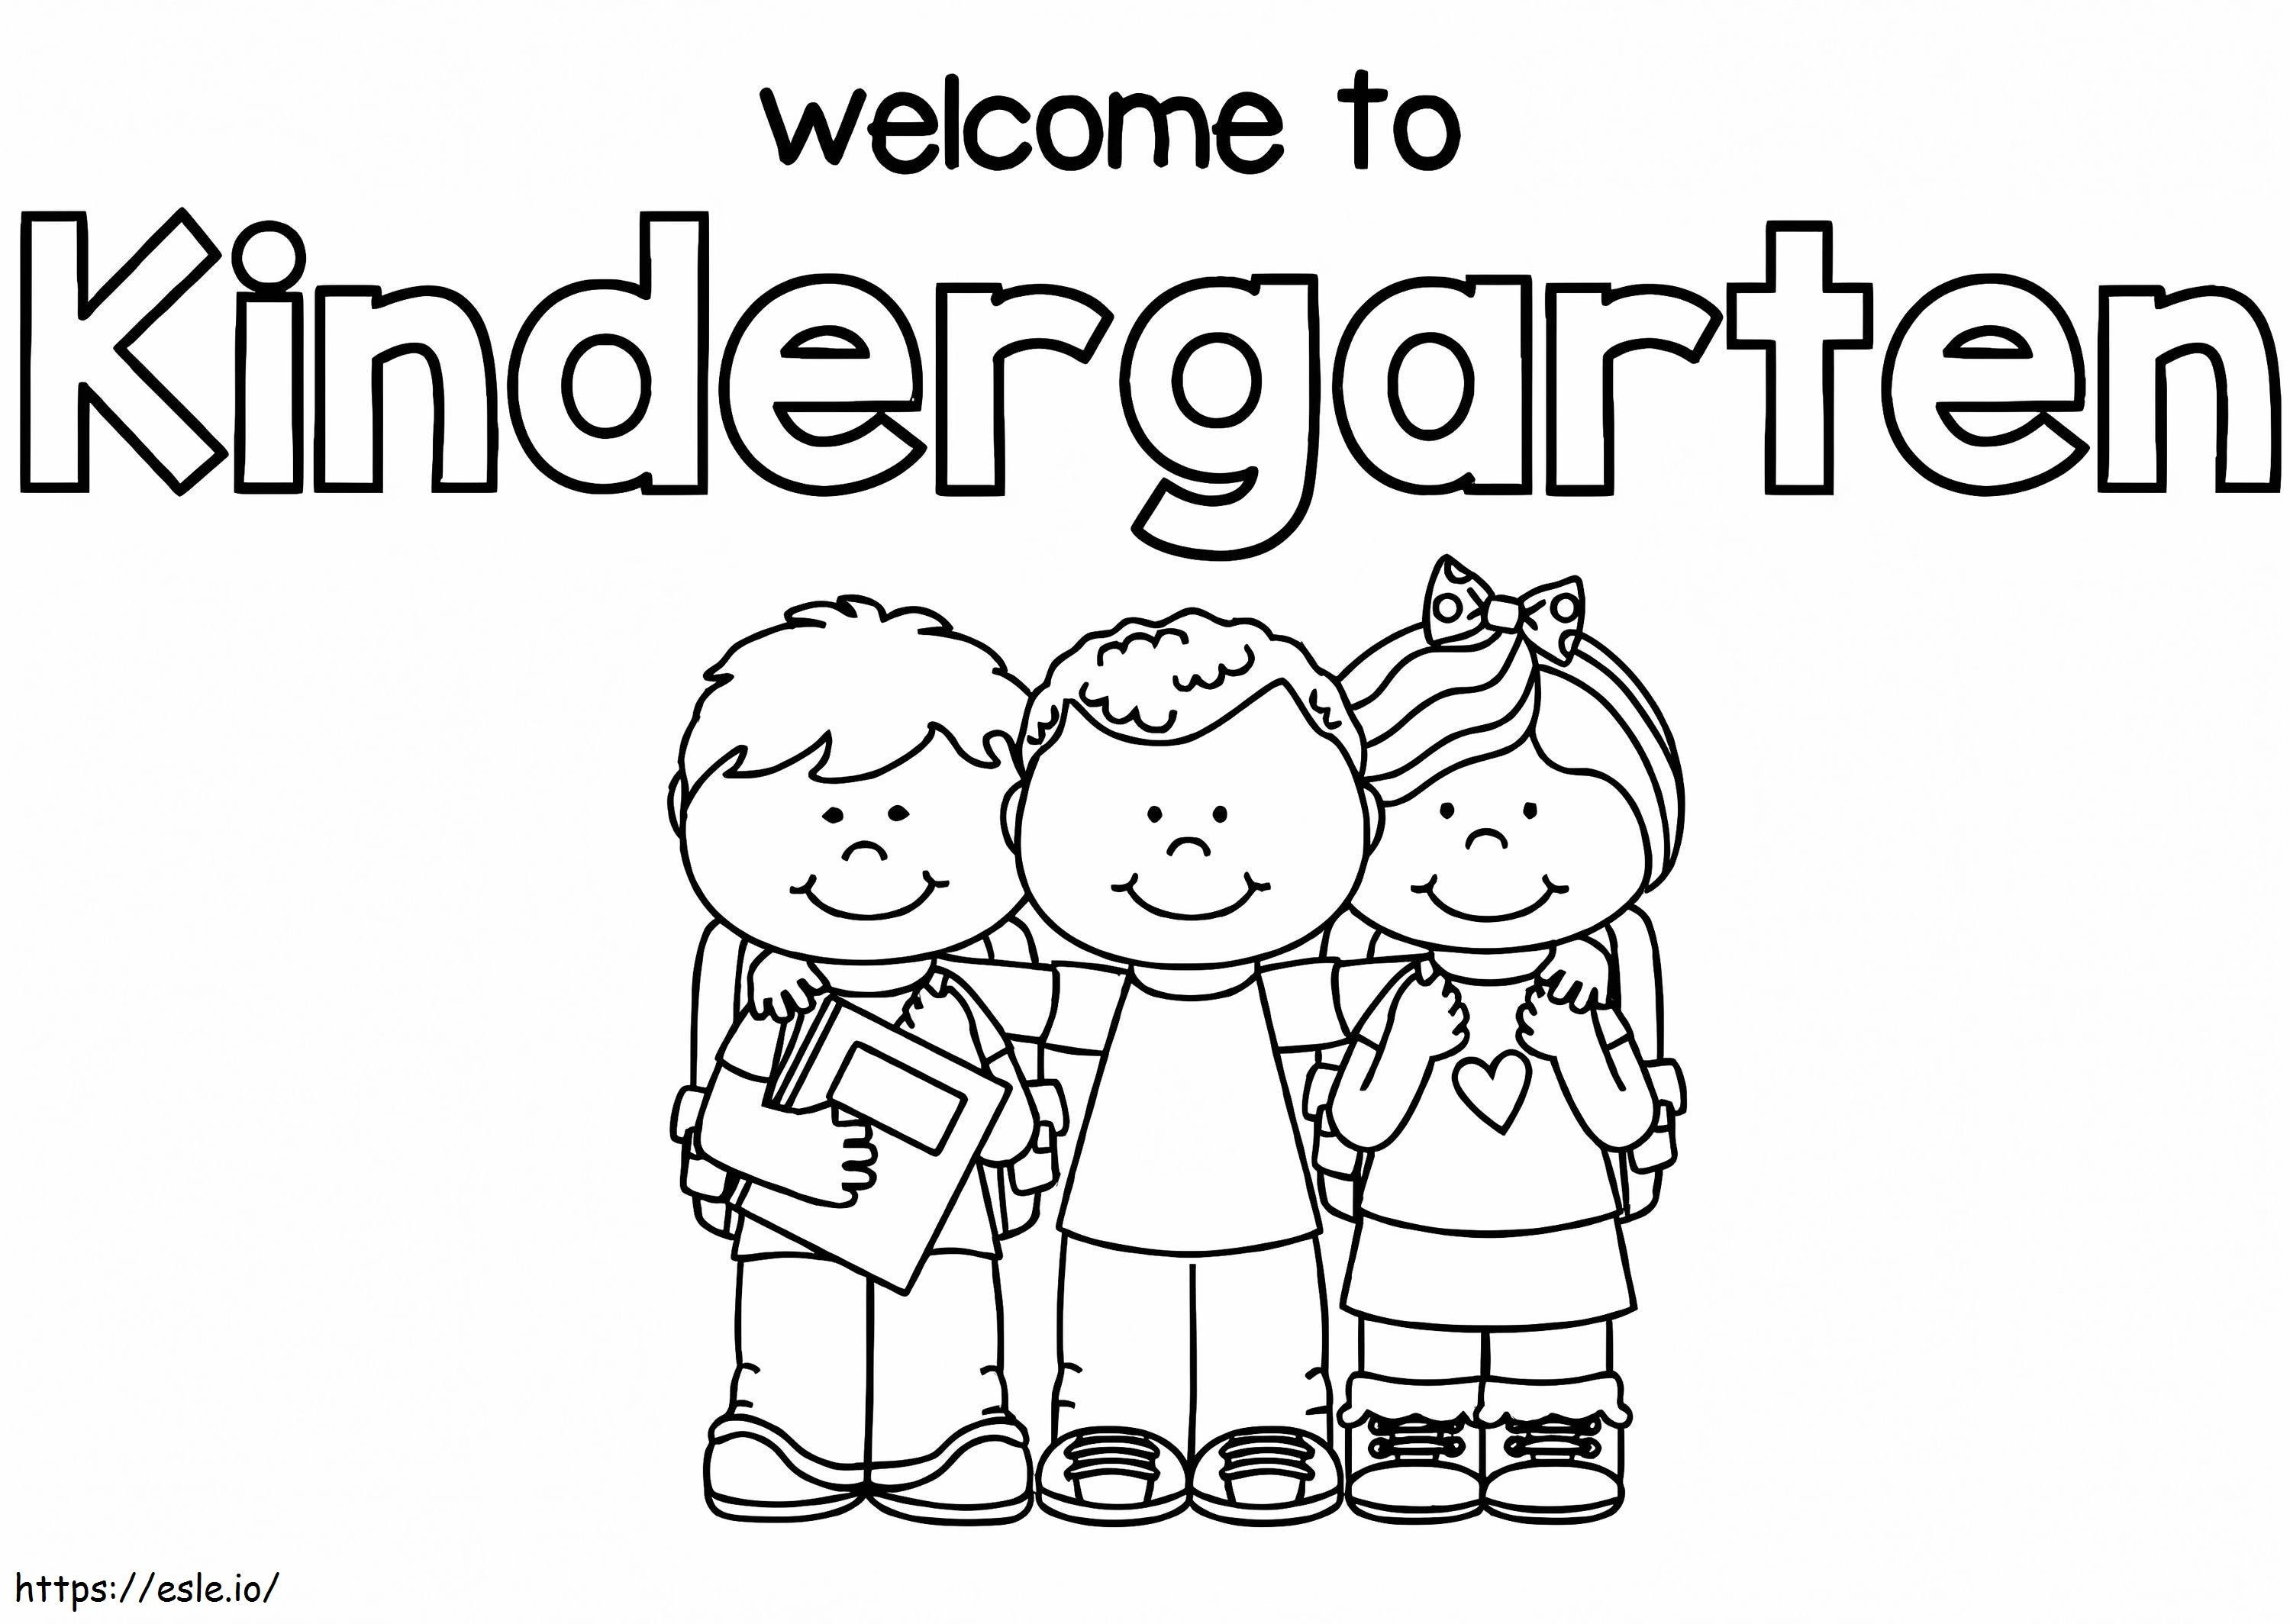 Welcome To Kindergarten 1 coloring page